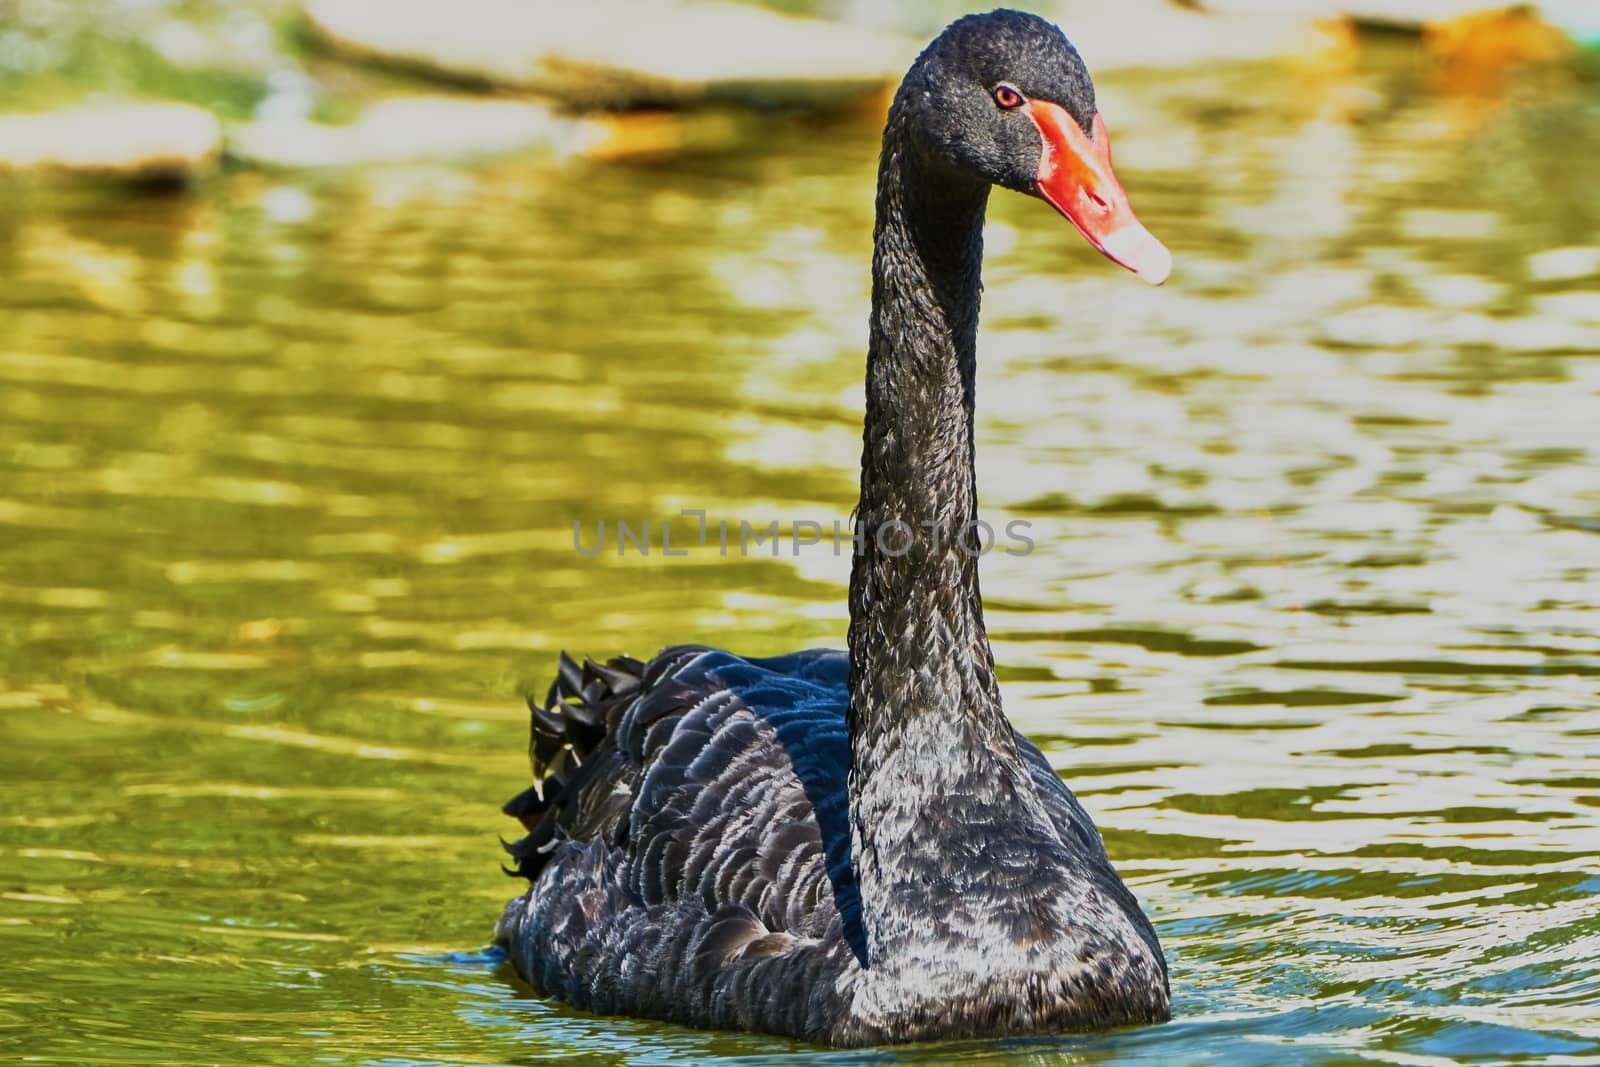 The black swan floats in a pond                               